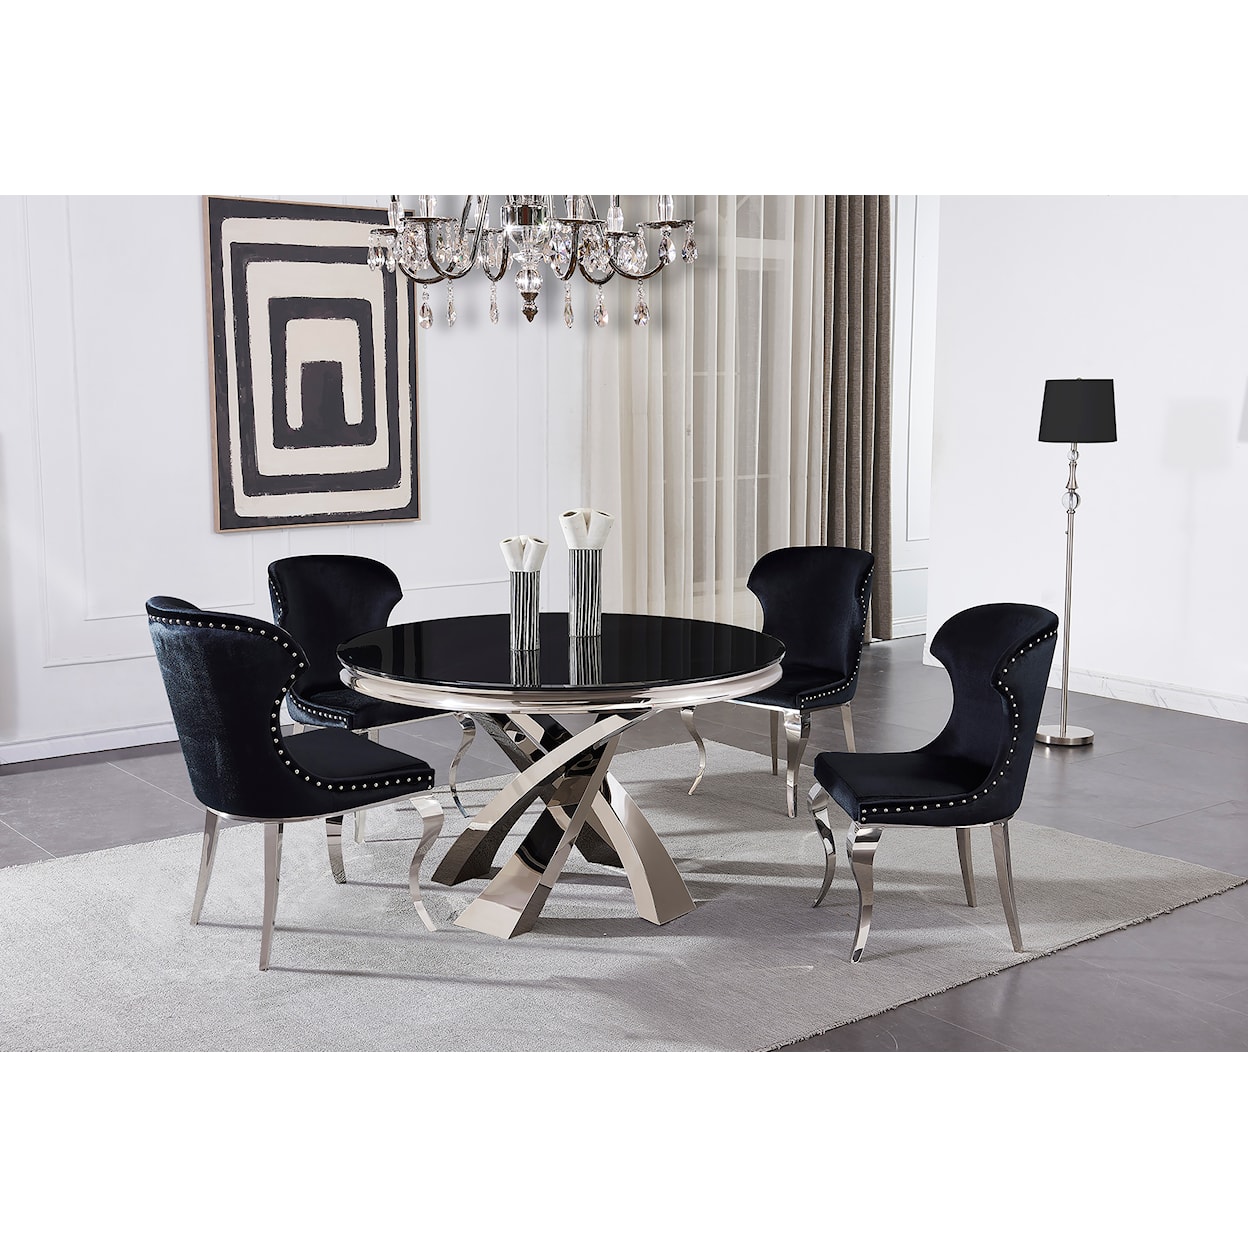 New Classic Ulysses Round Dining Table